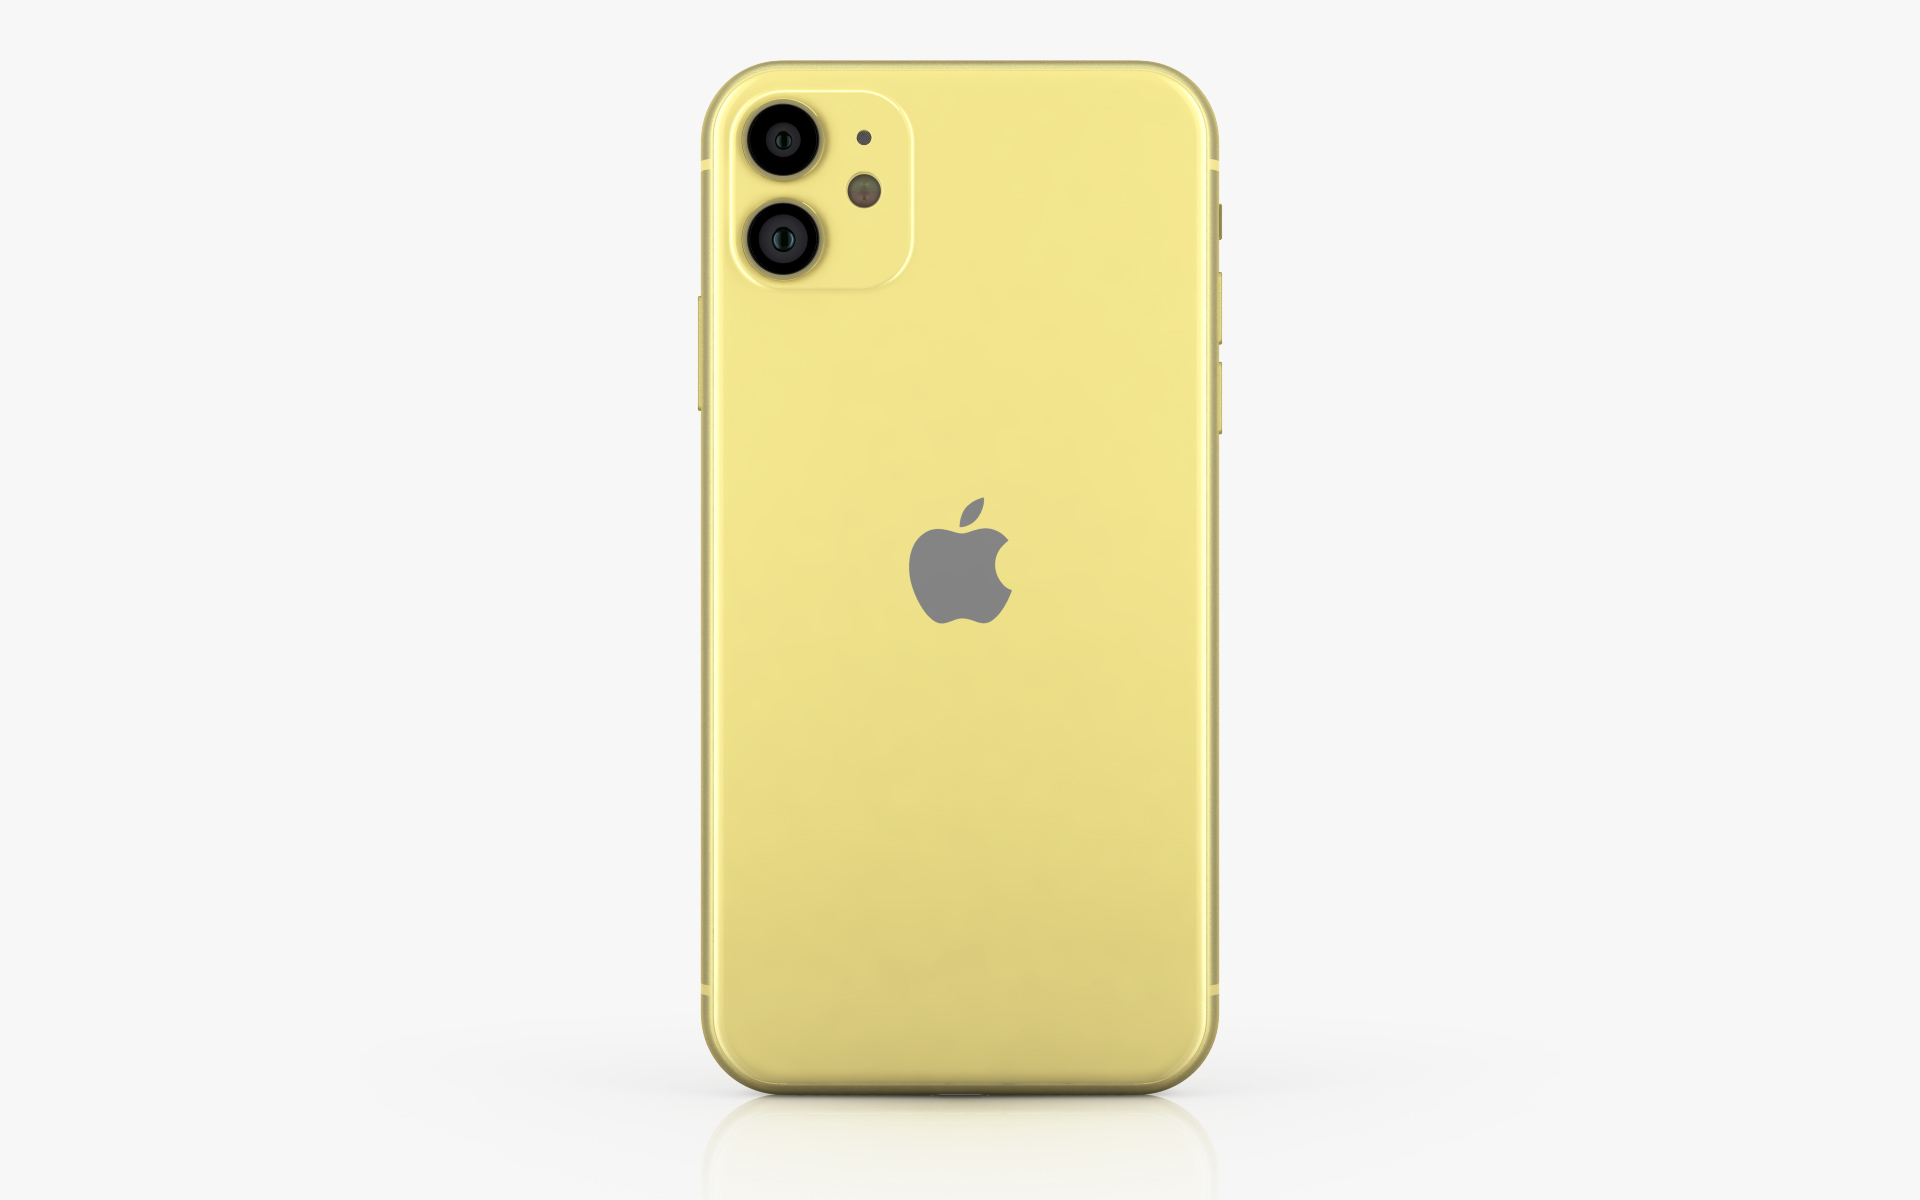 iphone-11-pro-iphone-11-pro-max-und-iphone-11-all-color-3d-modell